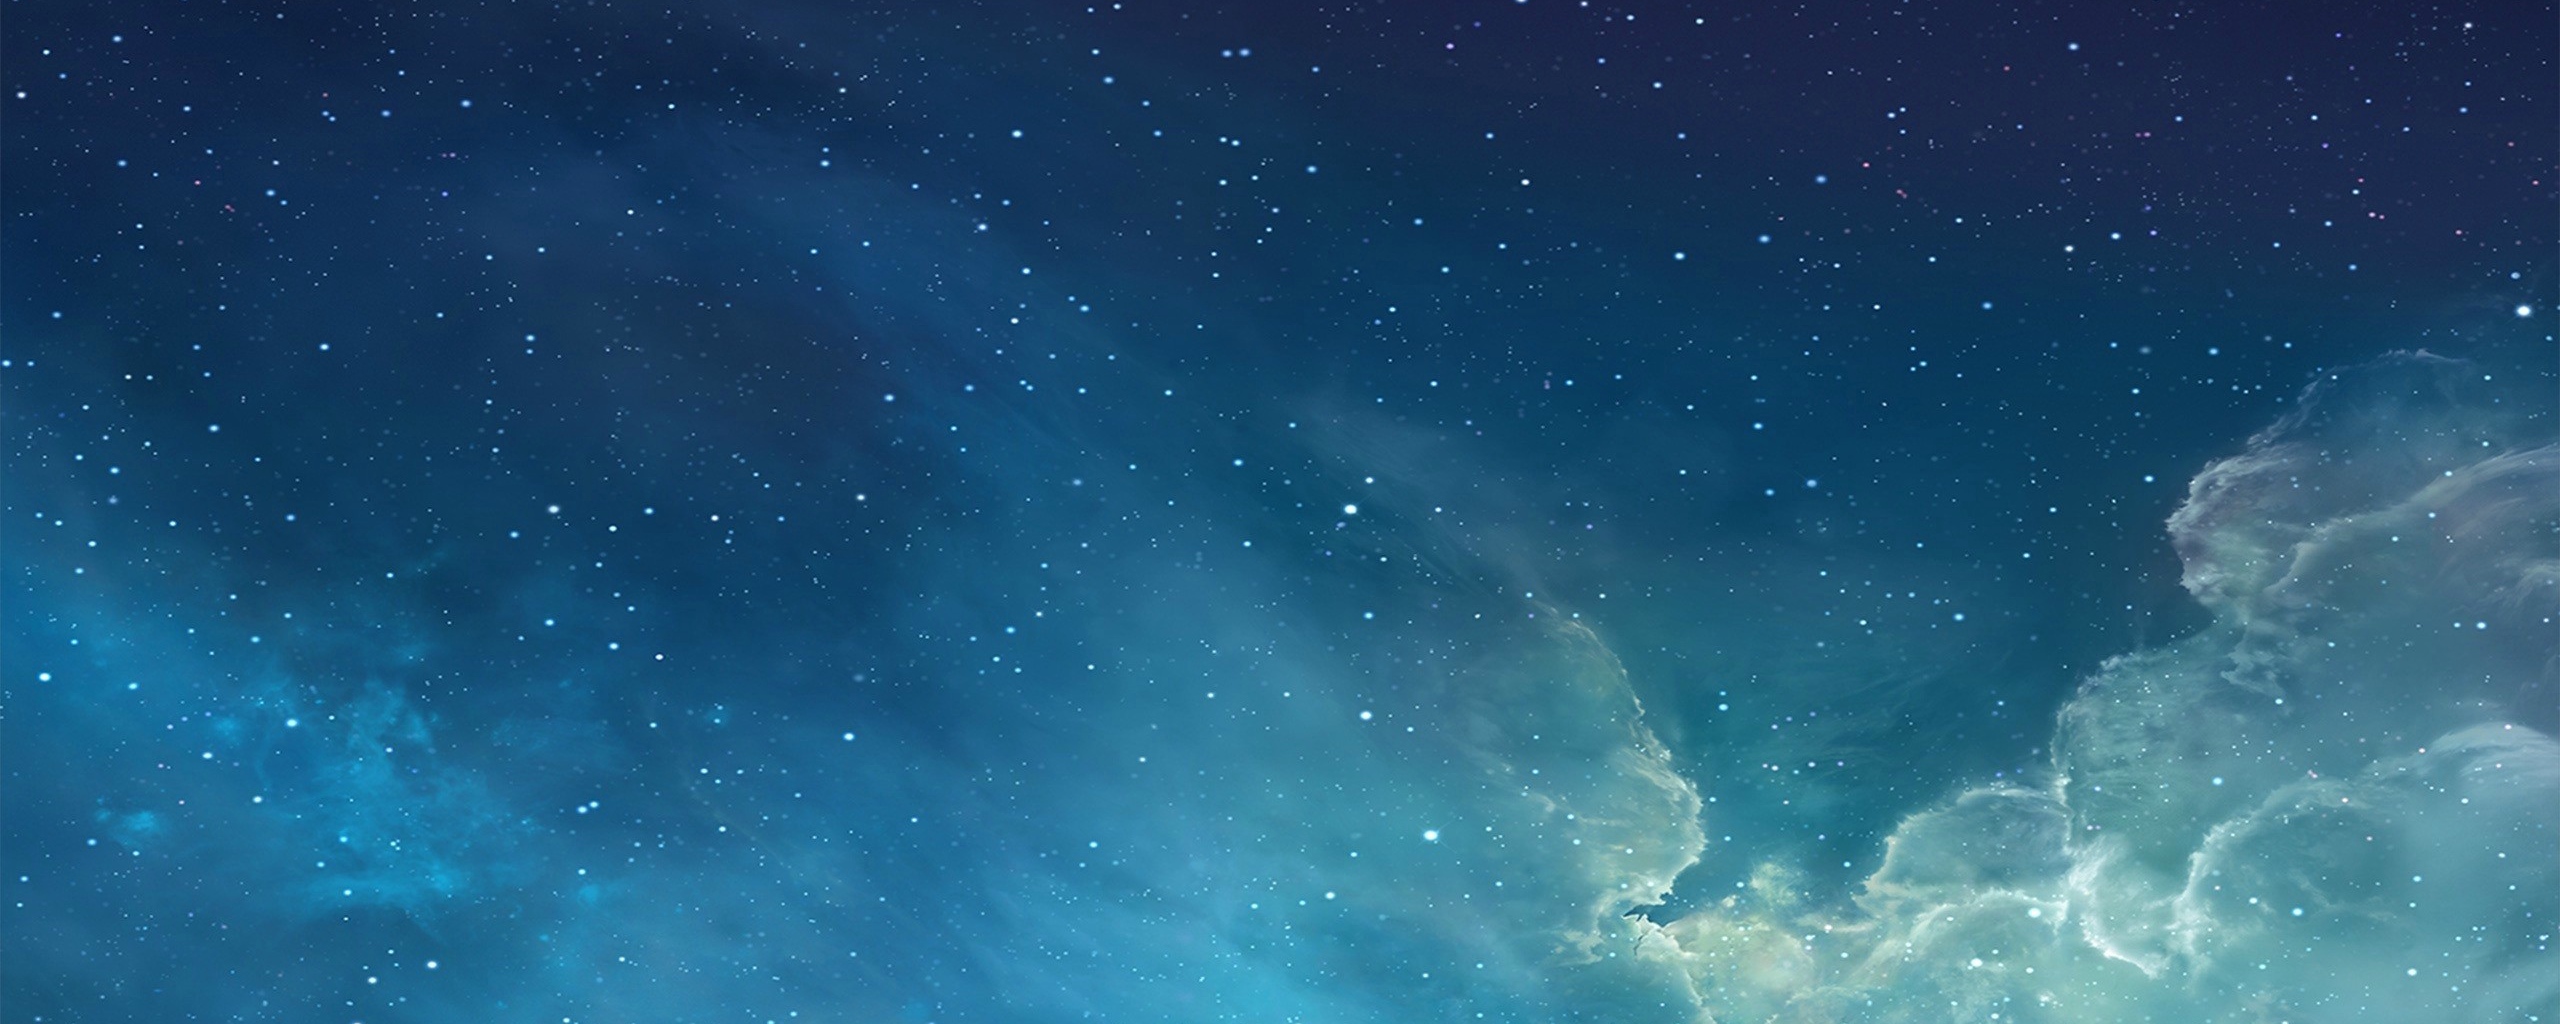 Wallpaper Sky, Stars, Clouds, Abstract - Doge Wallpaper Space - HD Wallpaper 